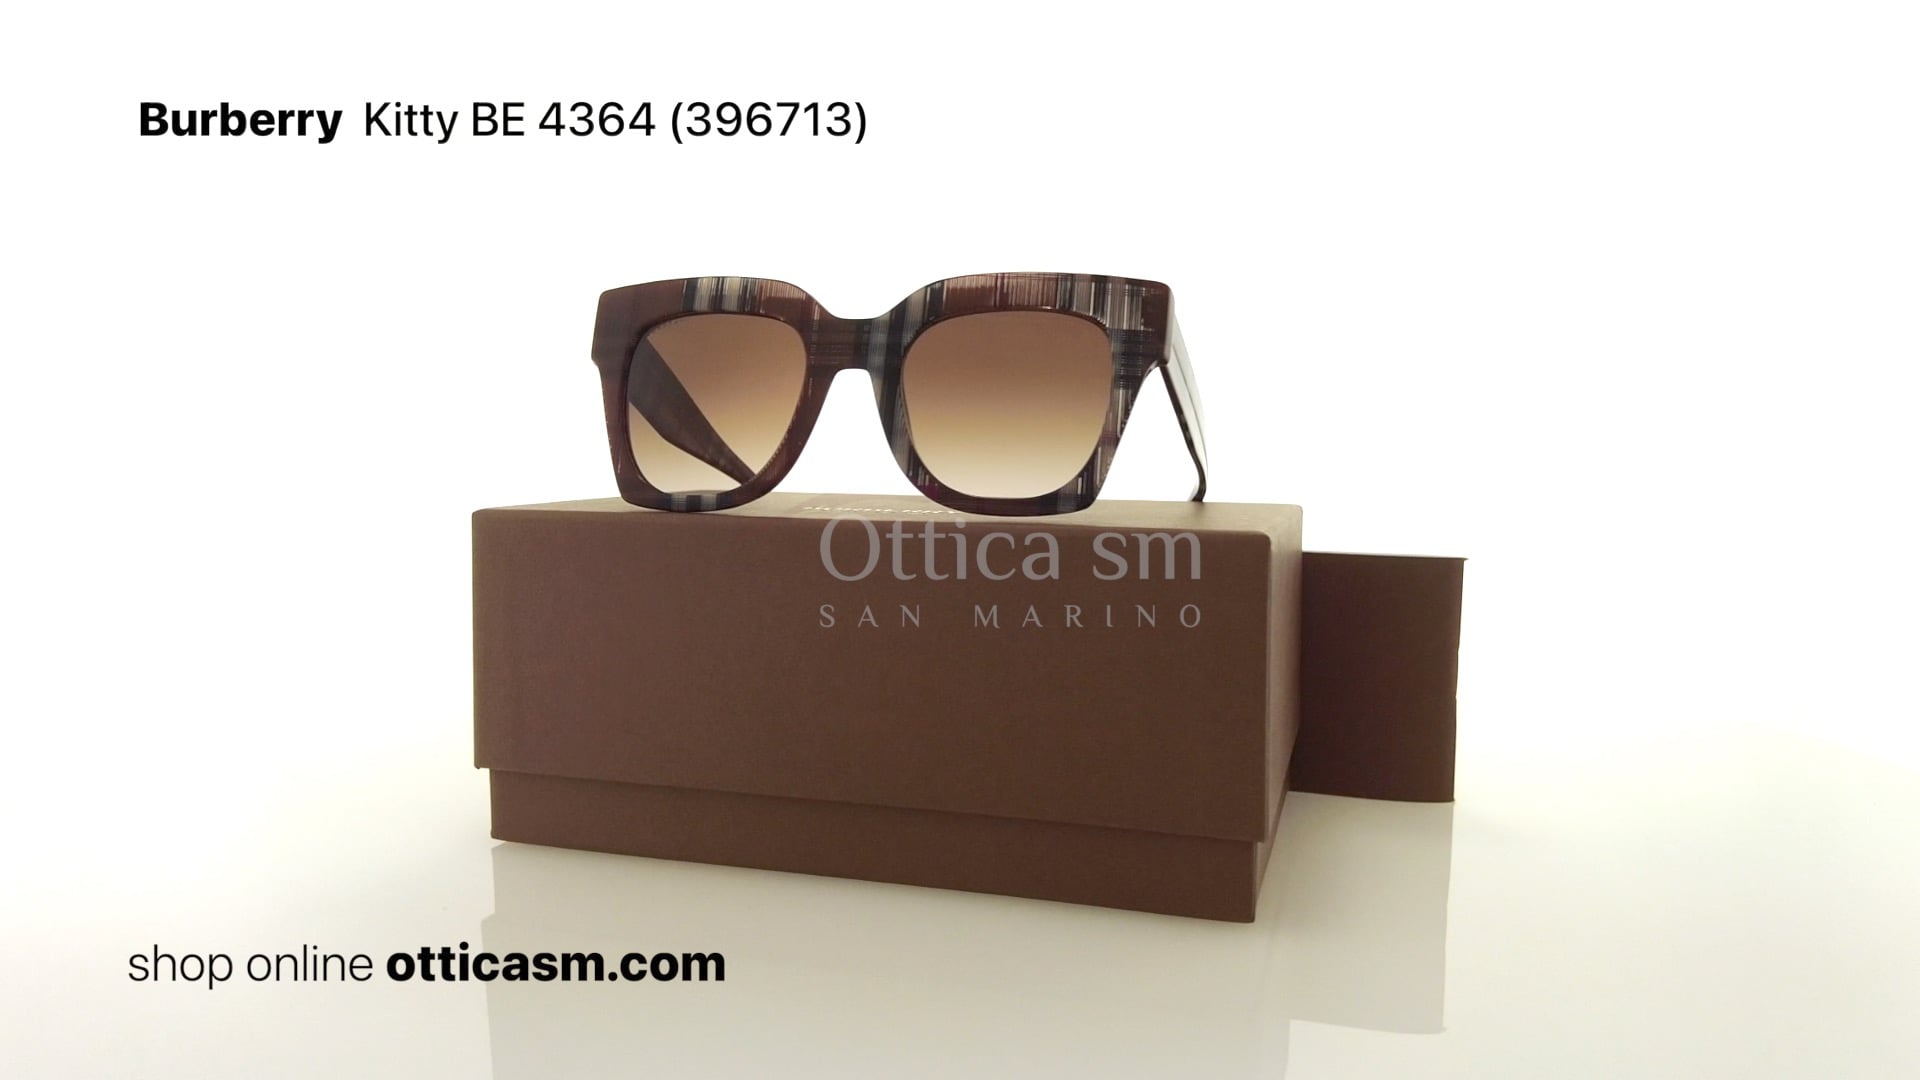 Burberry Kitty BE 4364 (396713)